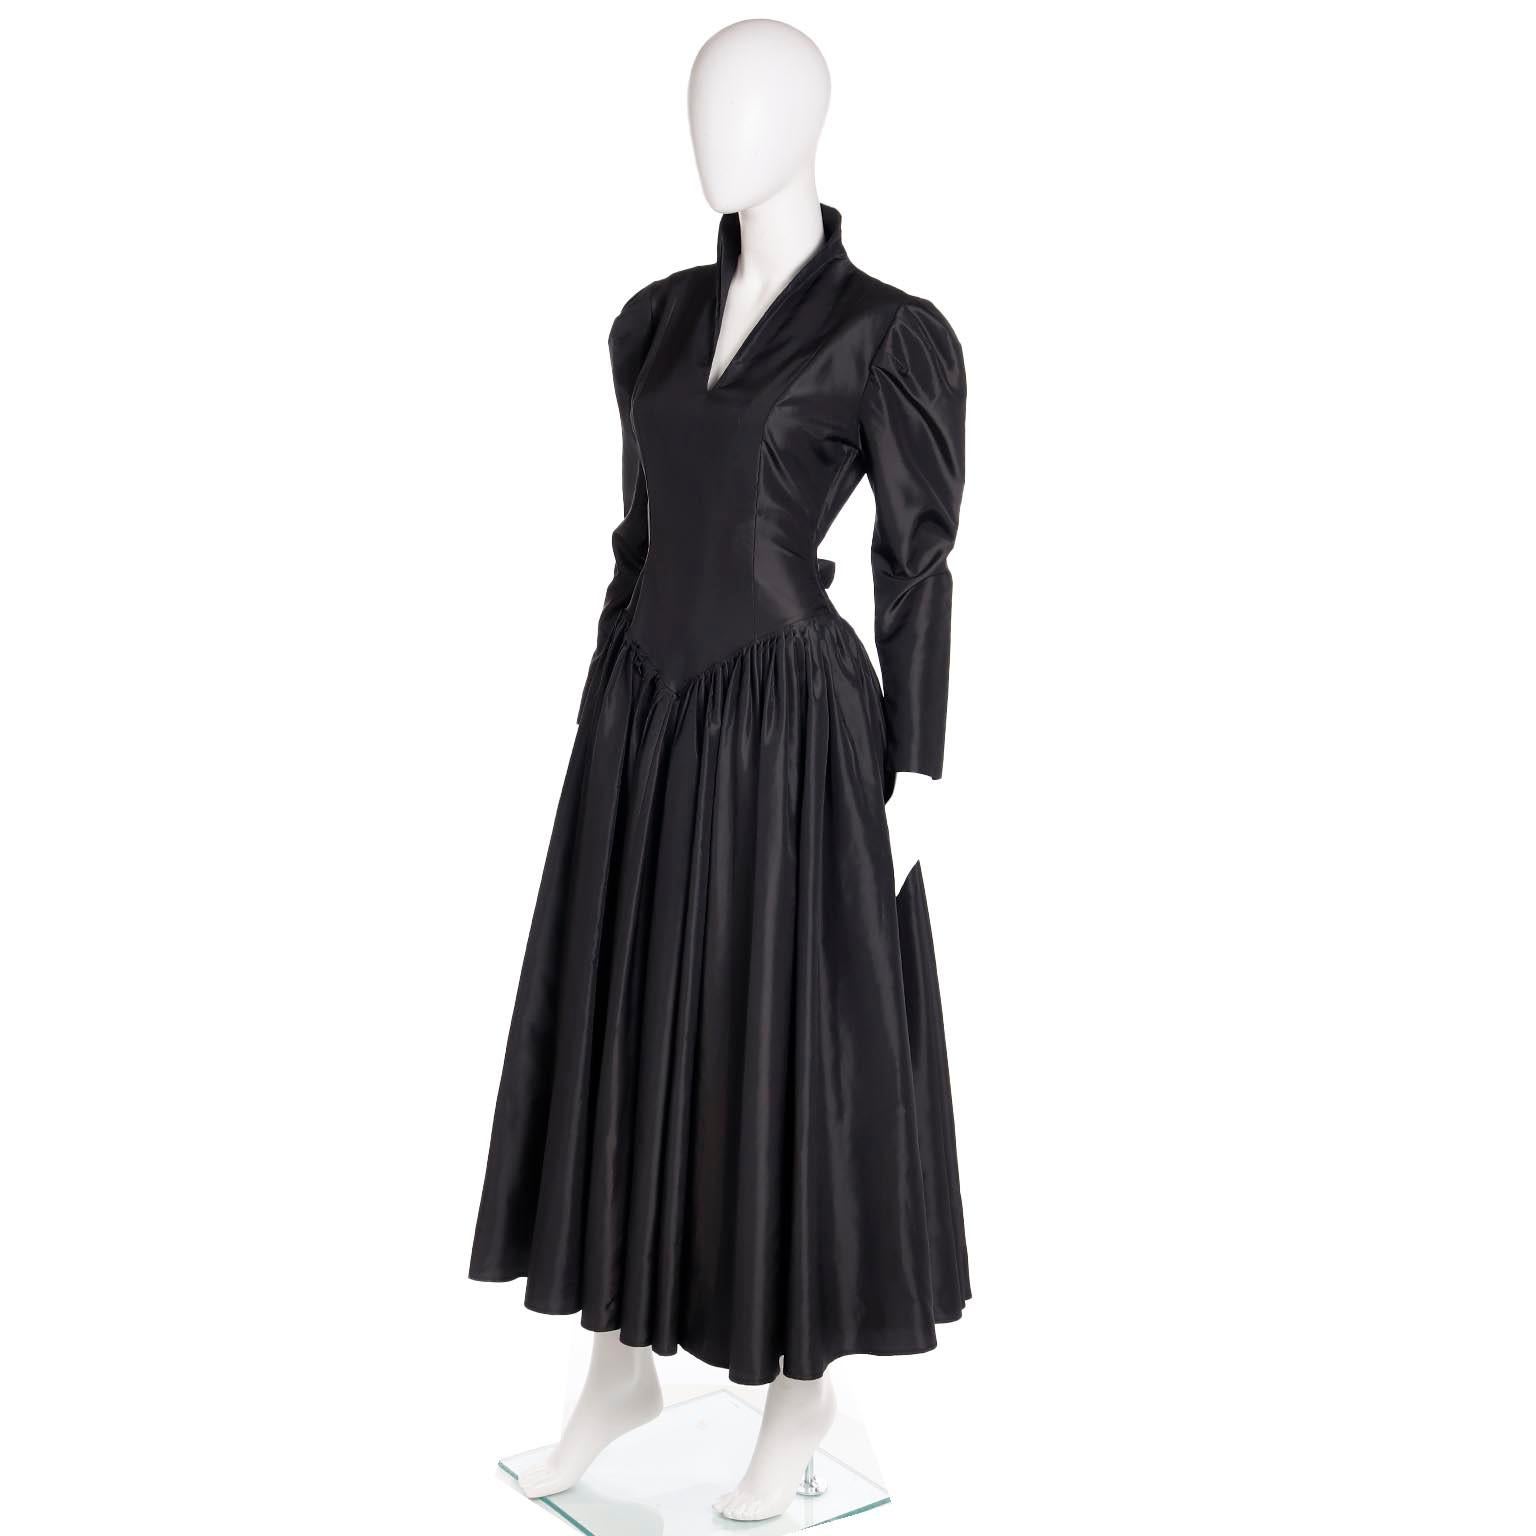 1980s Norma Kamali Victorian Inspired Black Dress For Sale 3